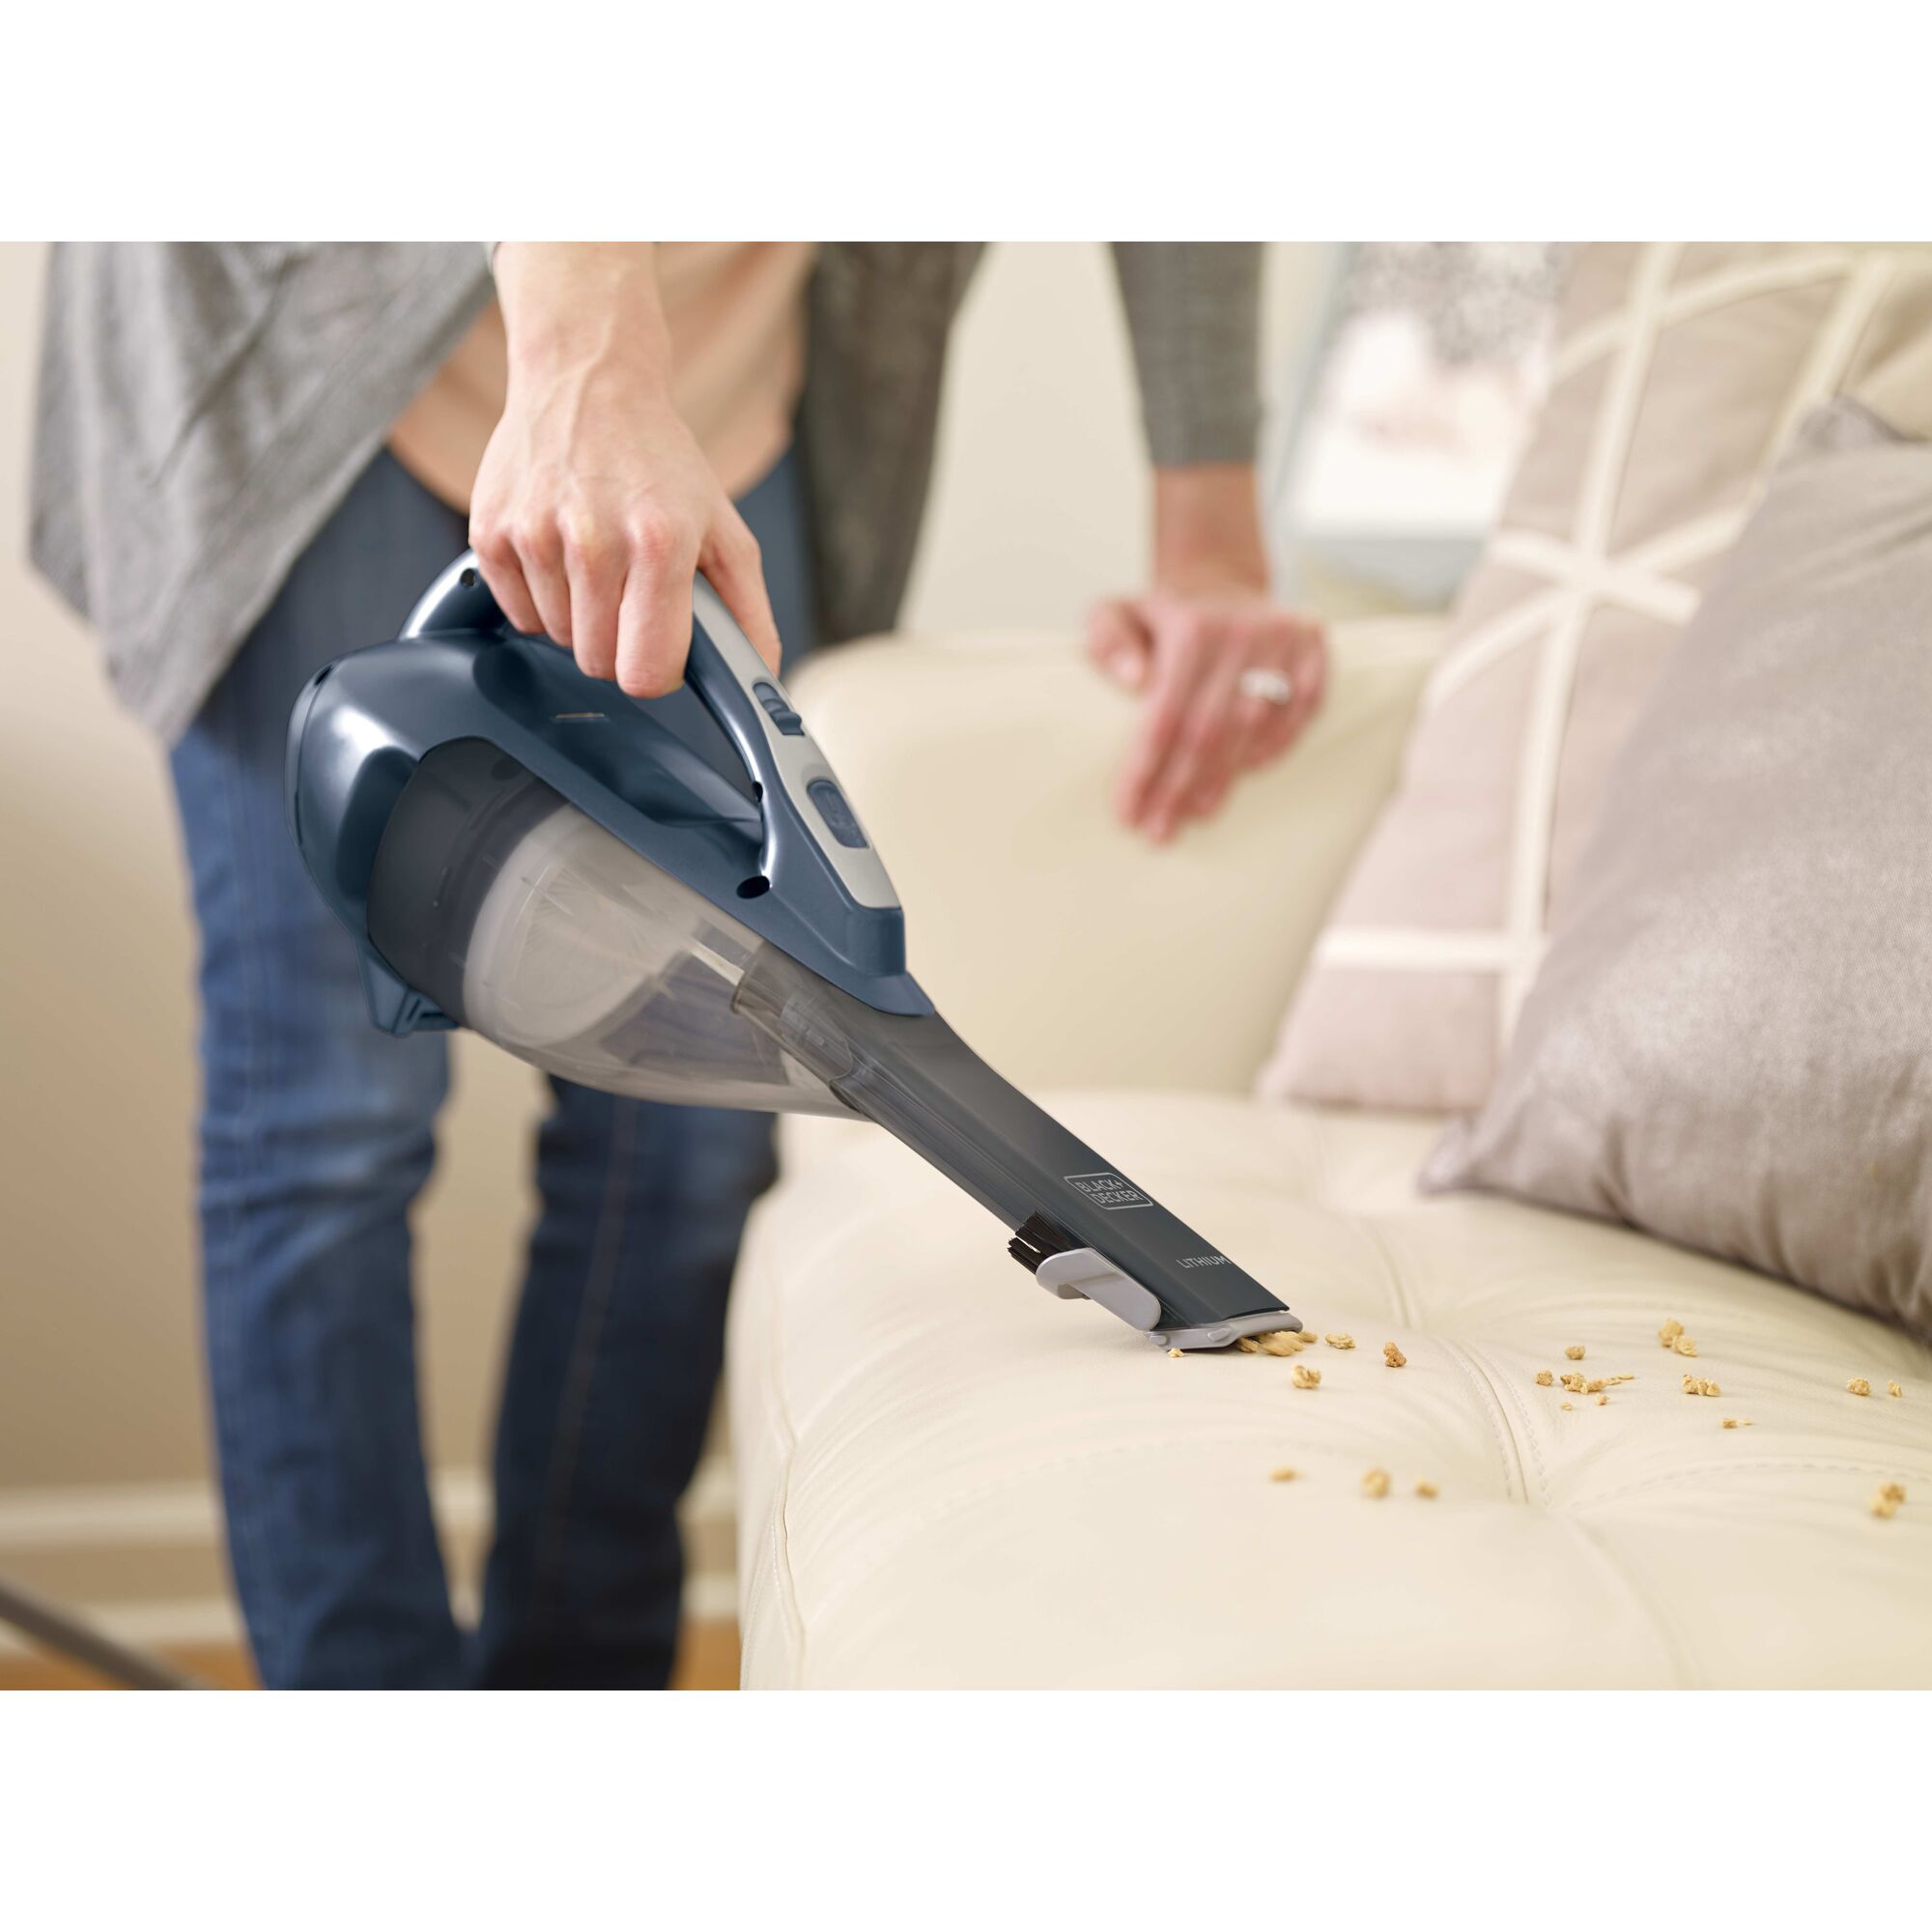 Dustbuster Advanced Clean Cordless Hand Vacuum being used to pick up food bits from sofa.